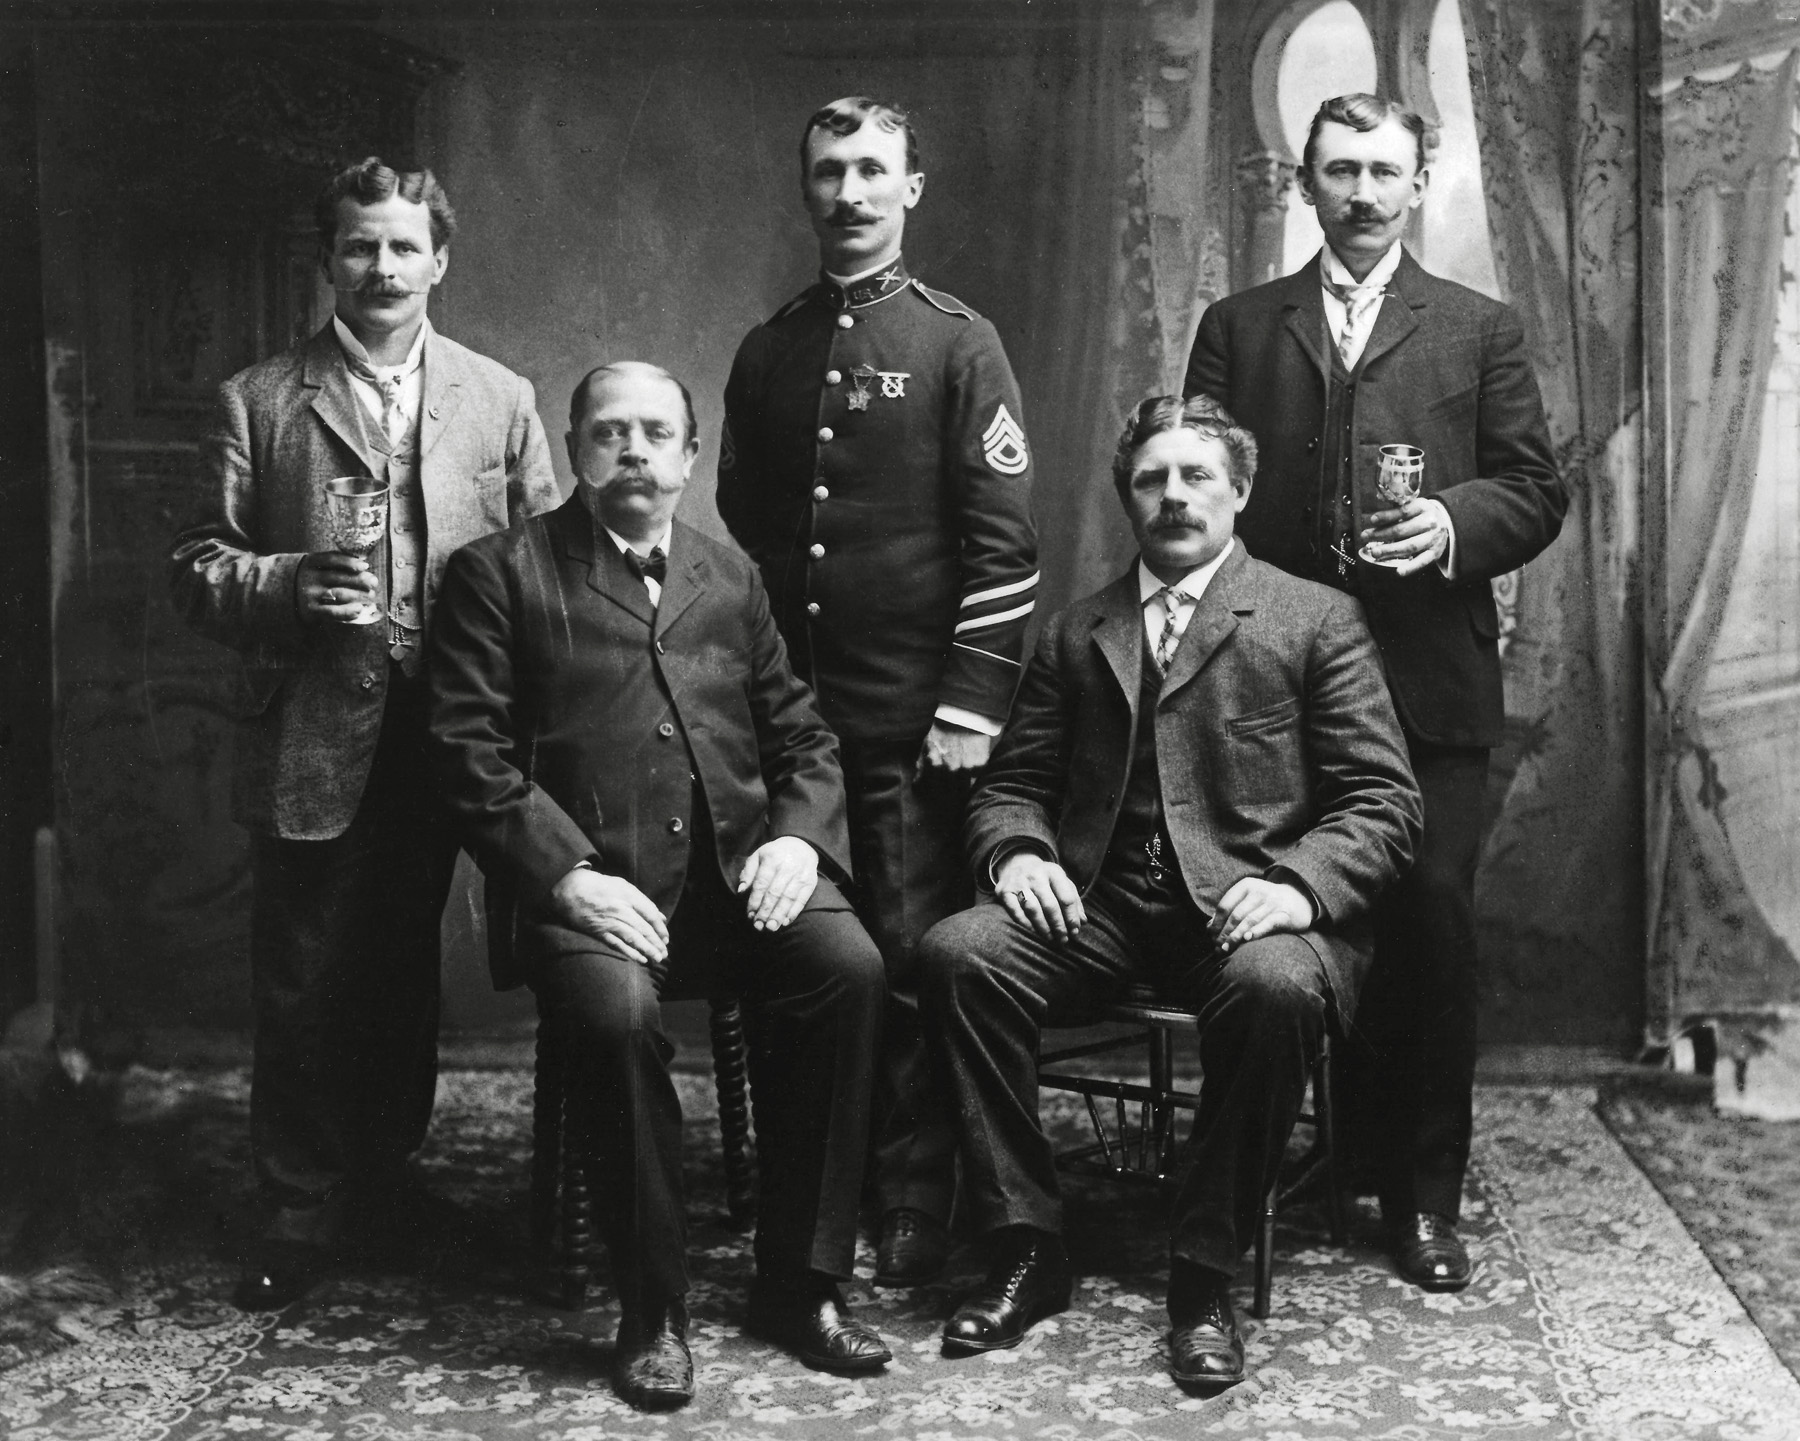 My paternal grandfather, Josef Alois Kappeler, upper right, (born in Switzerland in 1864) and his brother, August, a member of TR's Rough Riders, in uniform and 3 men who appear to be related. I believe they were members of a choral society.  Wish I knew more. View full size.